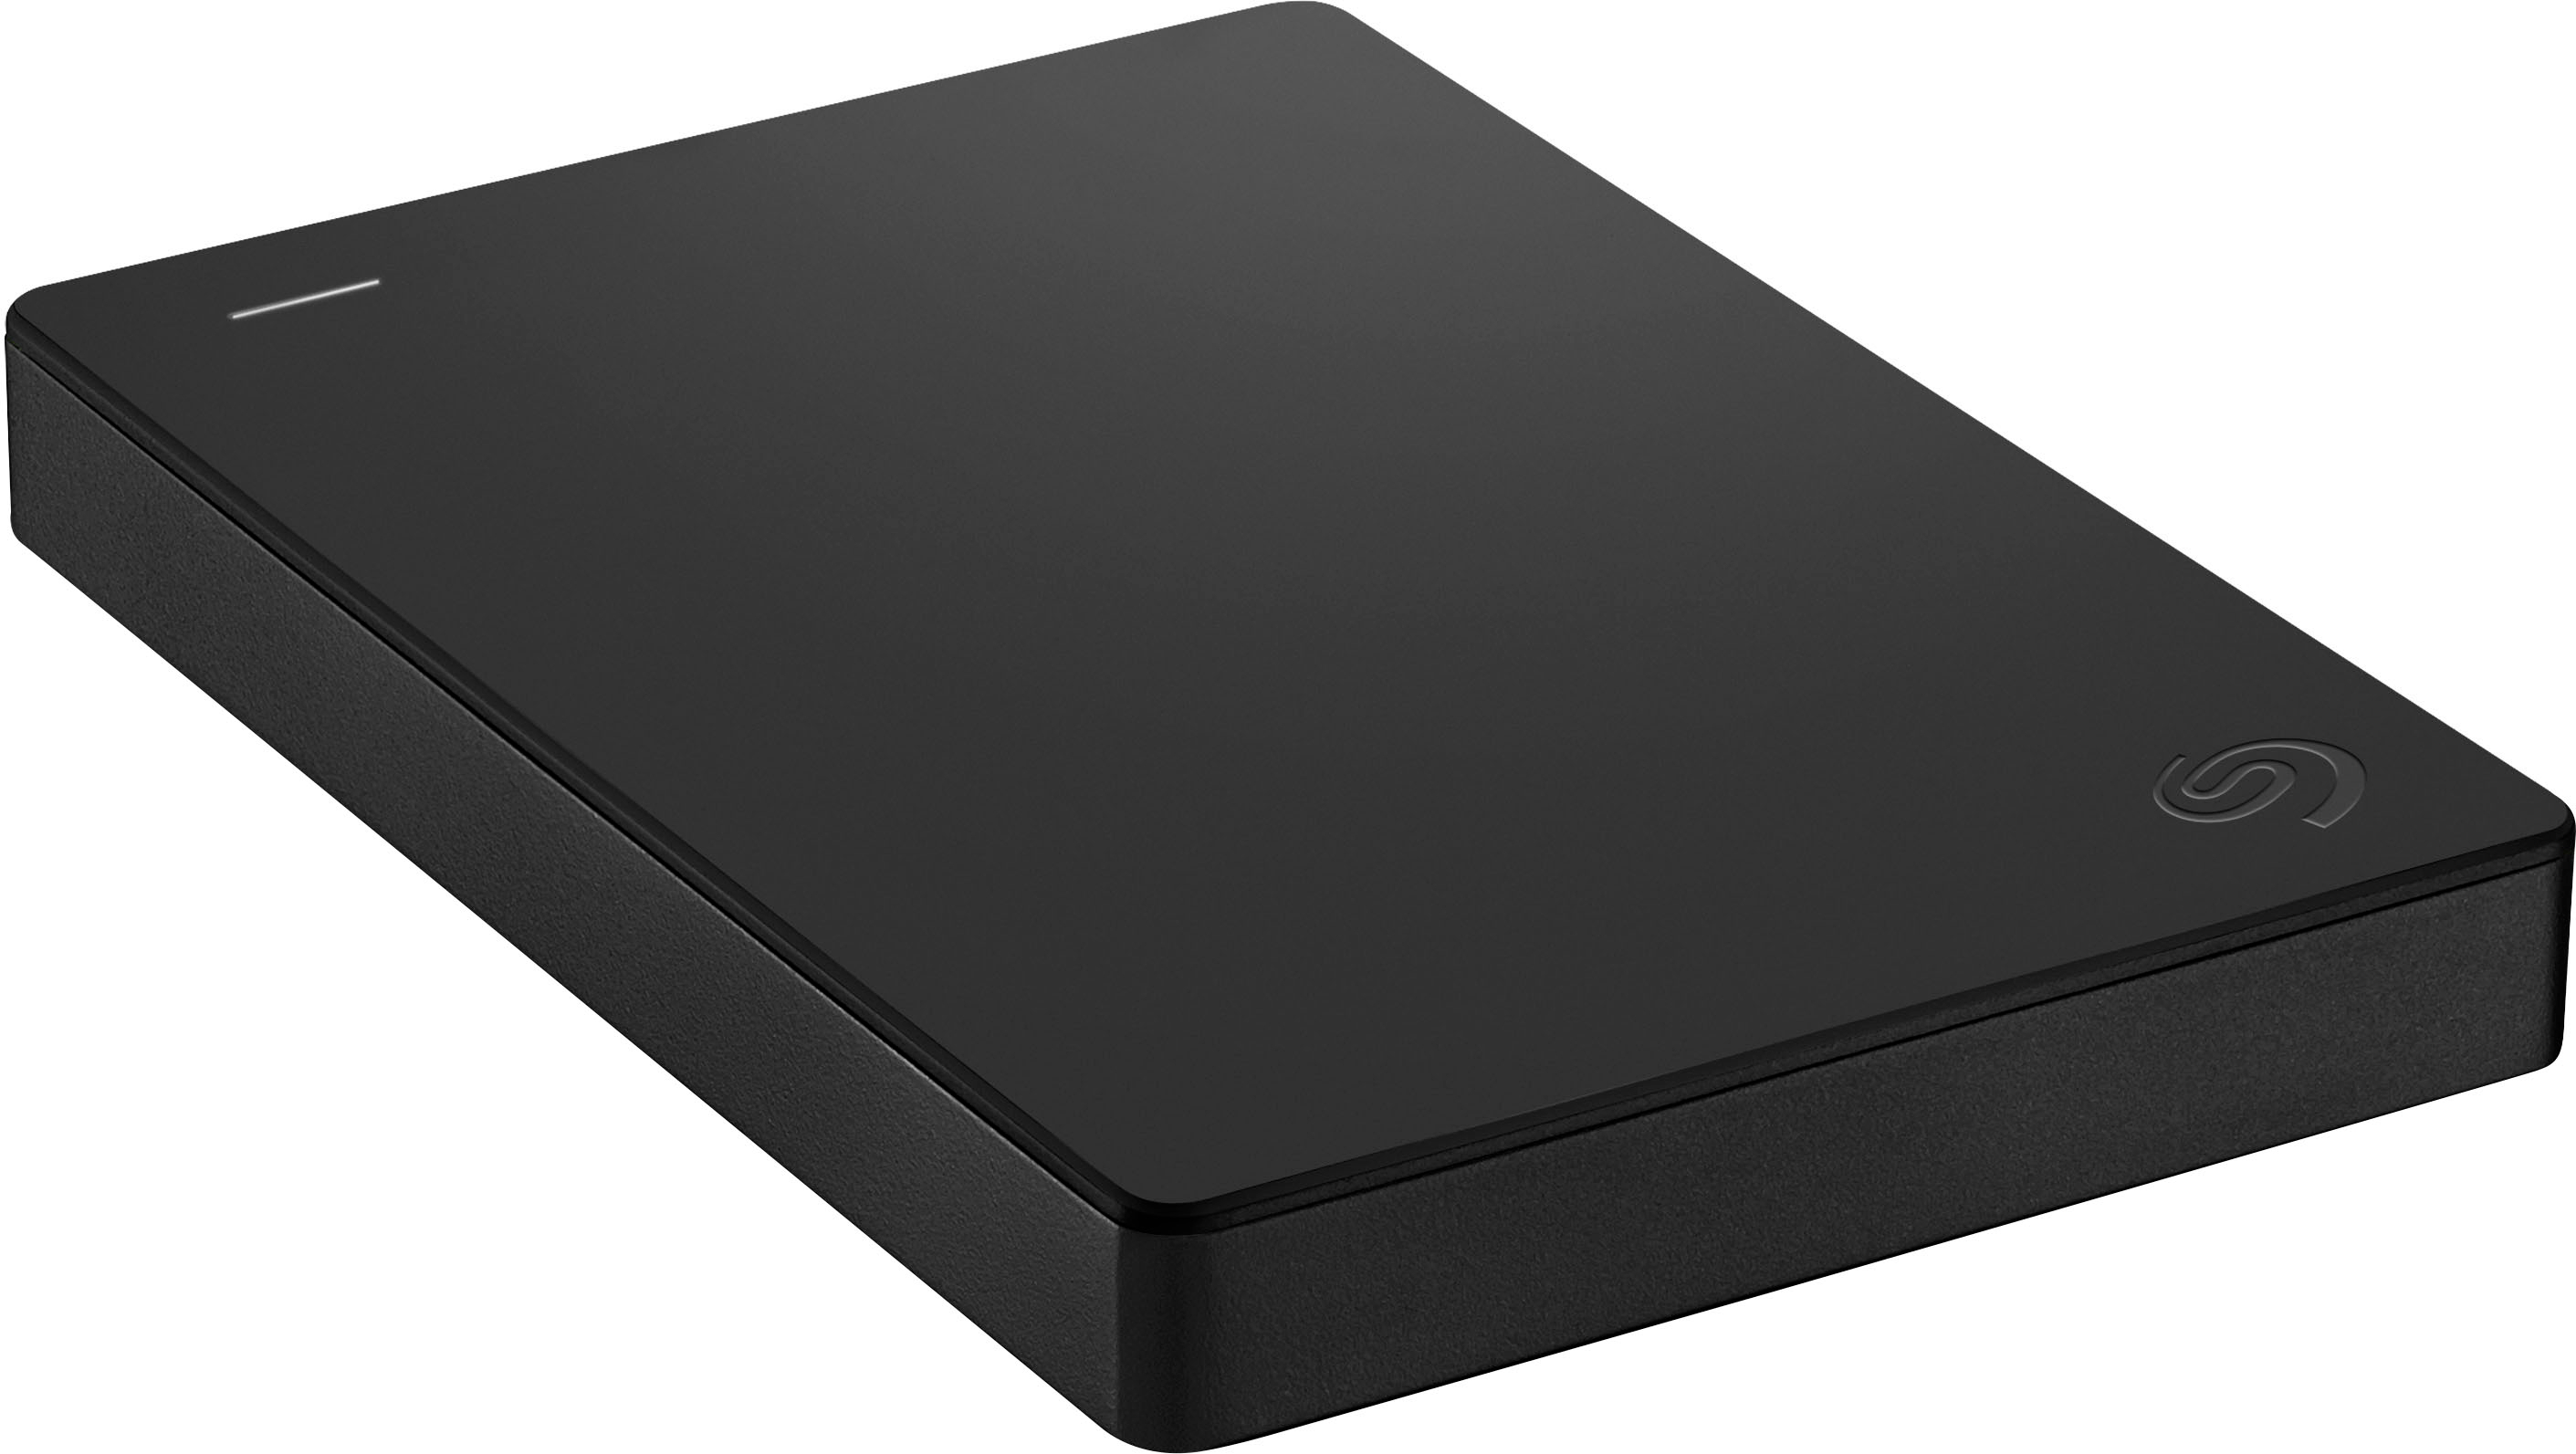 Seagate 2TB External USB 3.0 Portable Hard Drive with Rescue Data